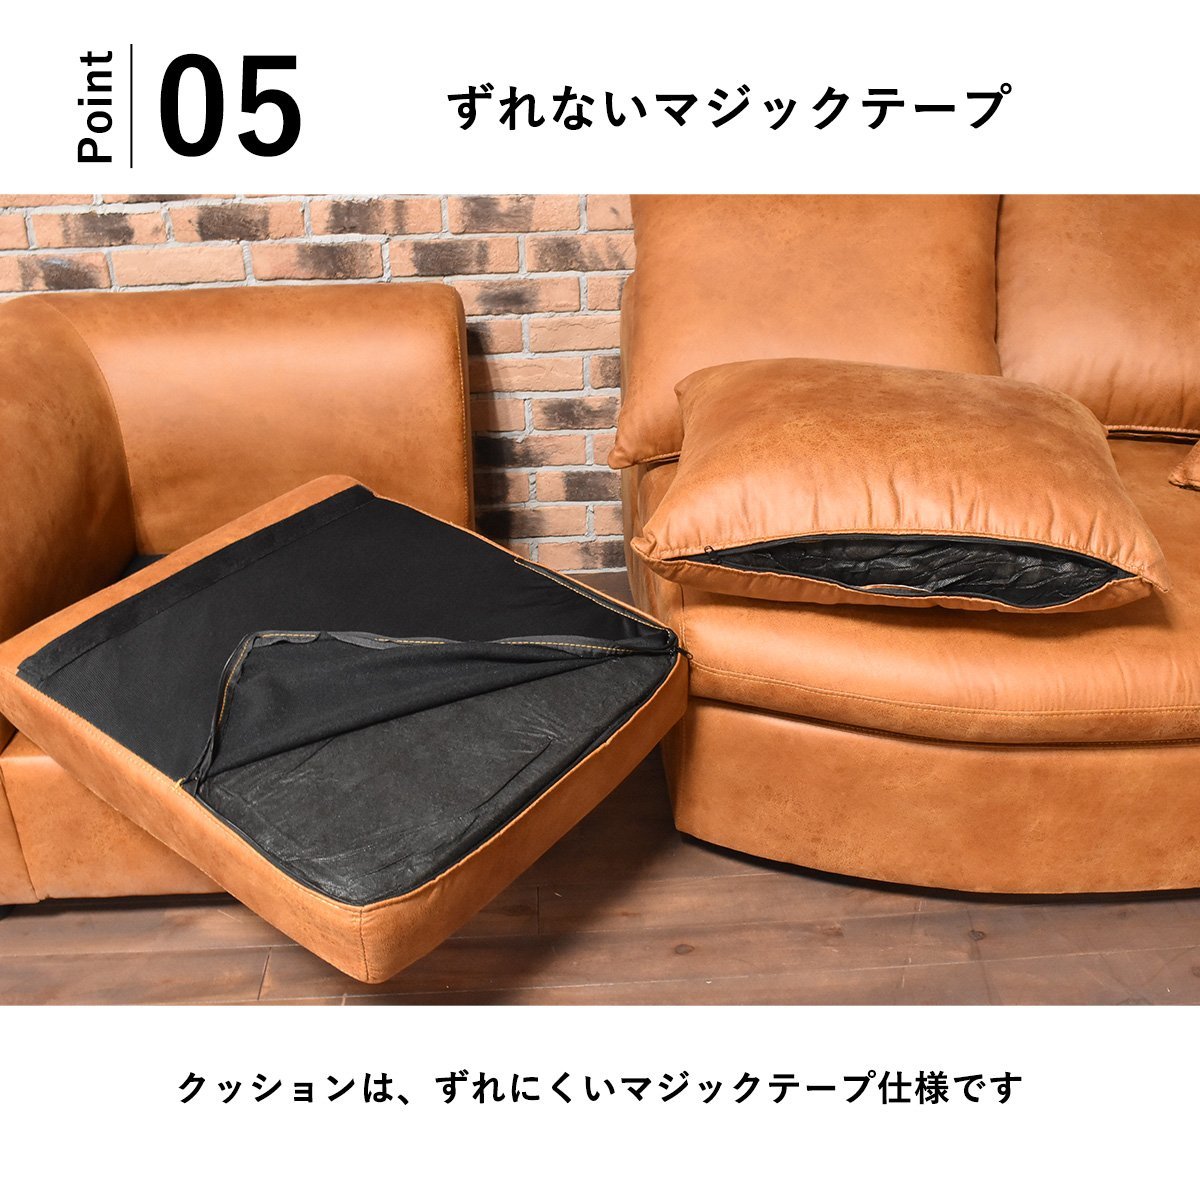 [ limitation free shipping ] leather fabric 3P triple sofa 3 seater . outlet furniture sofa [ new goods unused exhibition goods ]KEN